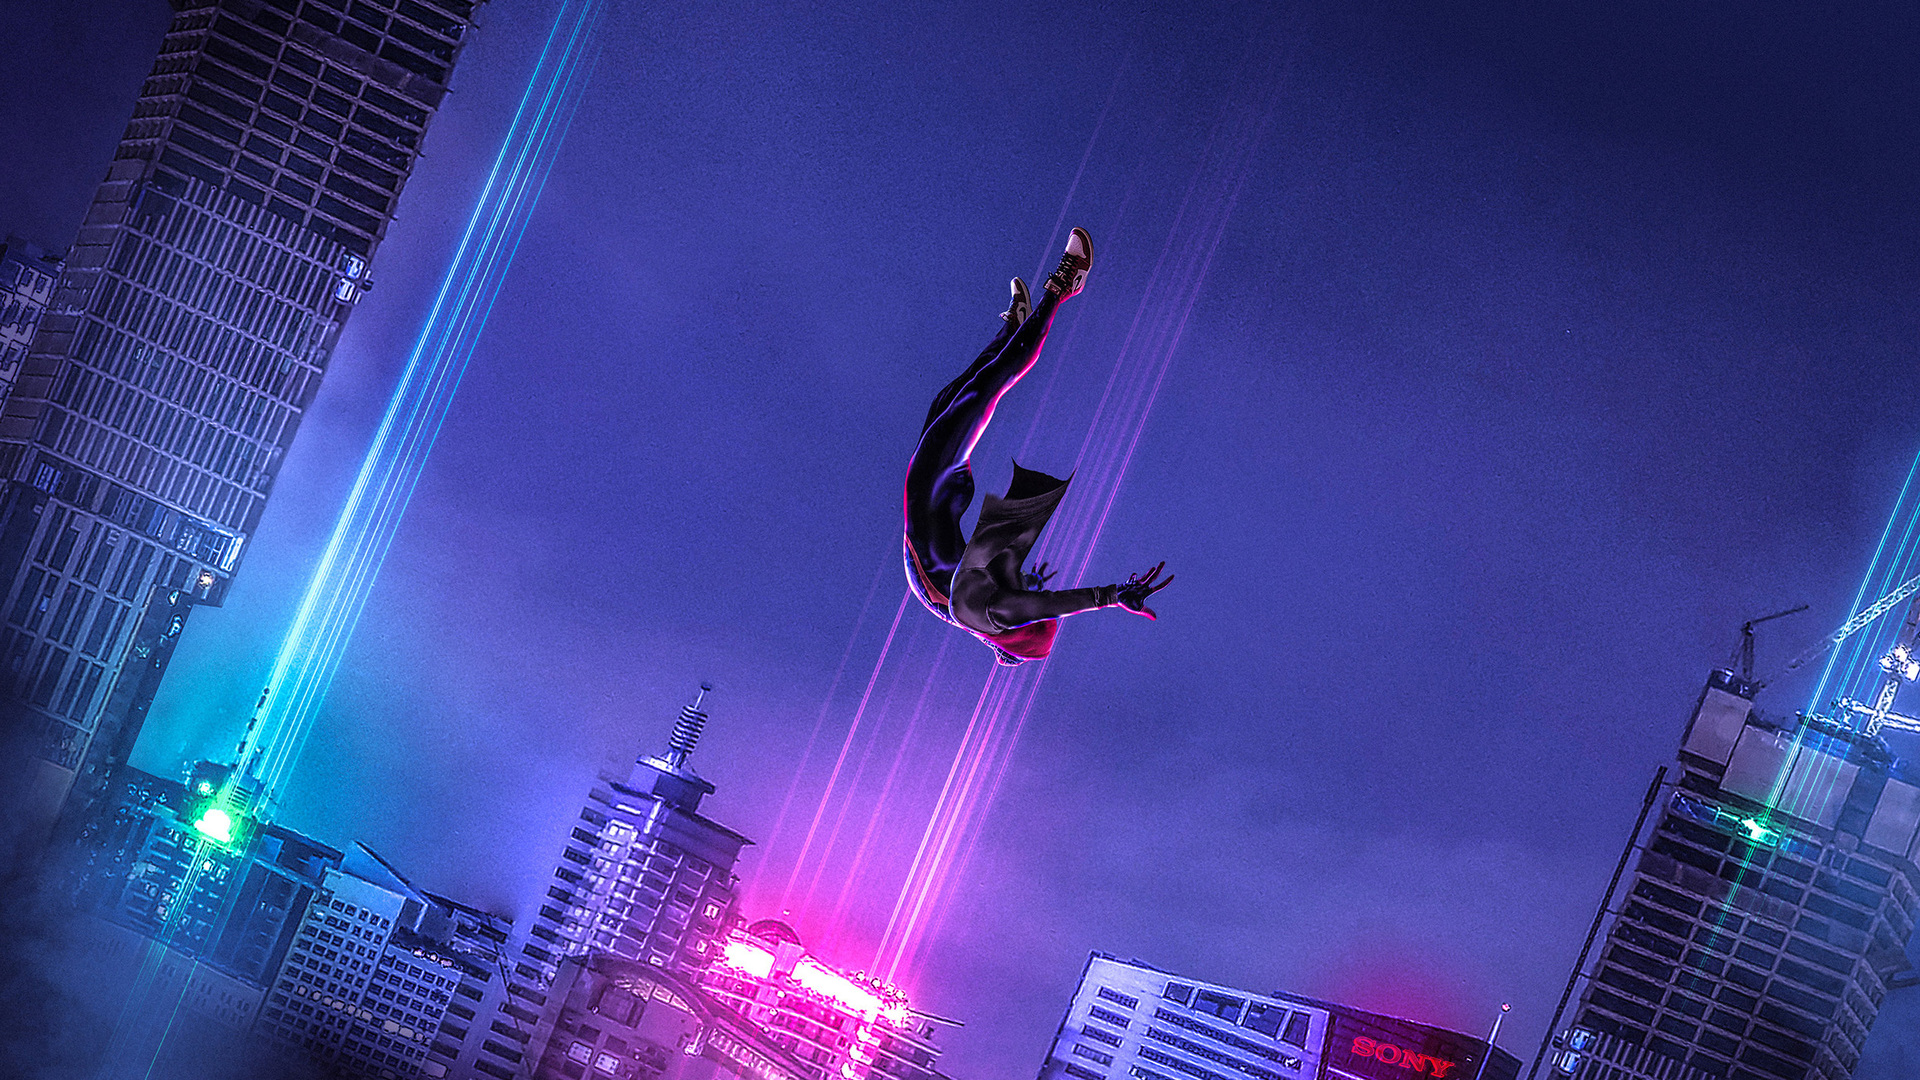 wallpapers spider man, spider man: into the spider verse, movie, miles morales